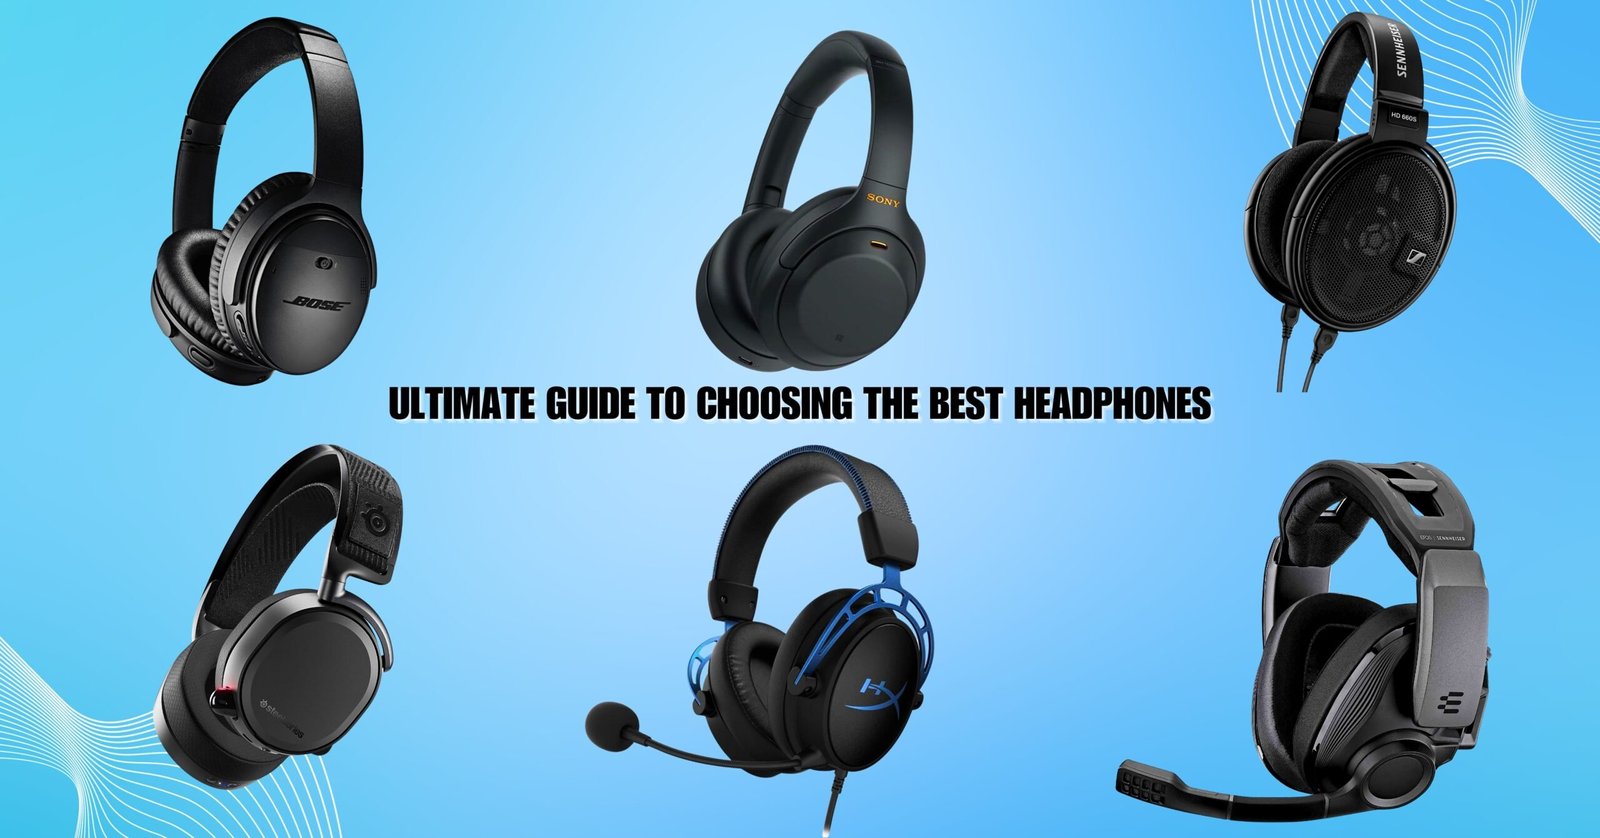 The Ultimate Guide to Choosing the Best Headphones for Gaming and Music